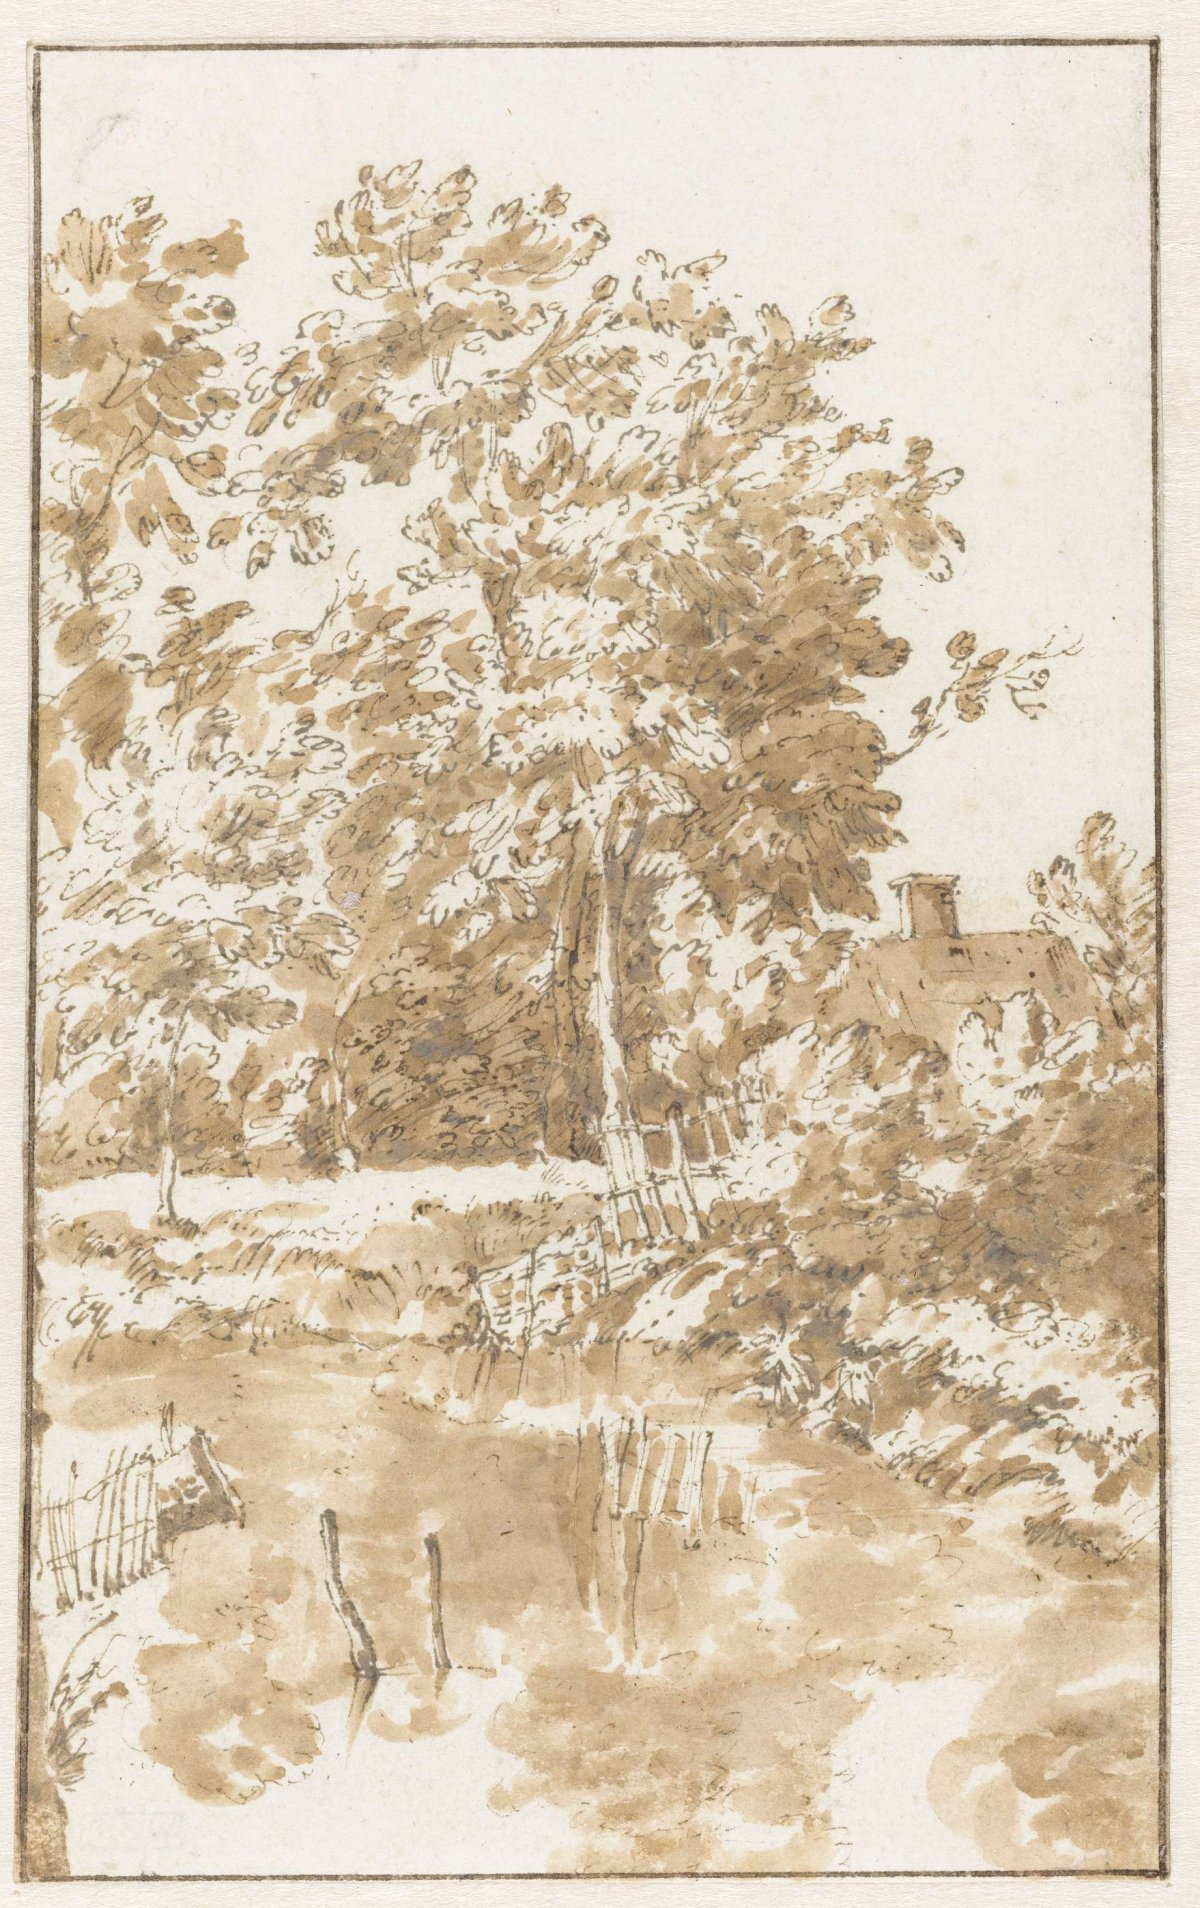 Bank of a water, with trees and a house, Jan de Bisschop, 1648 - 1671